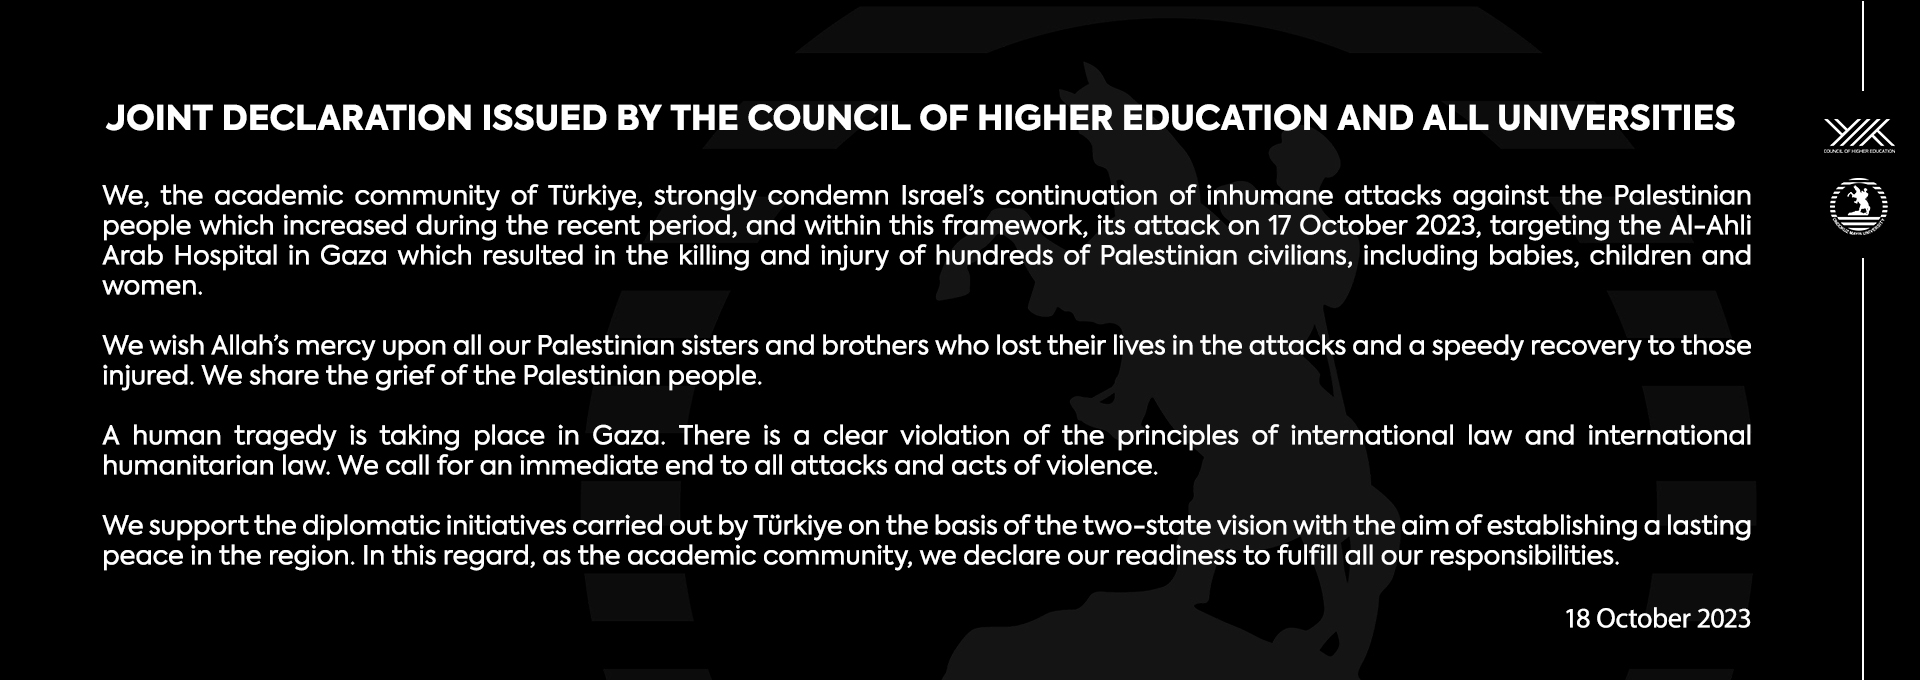 JOINT DECLARATION ISSUED BY THE COUNCIL OF HIGHER EDUCATION AND ALL UNIVERSITIES